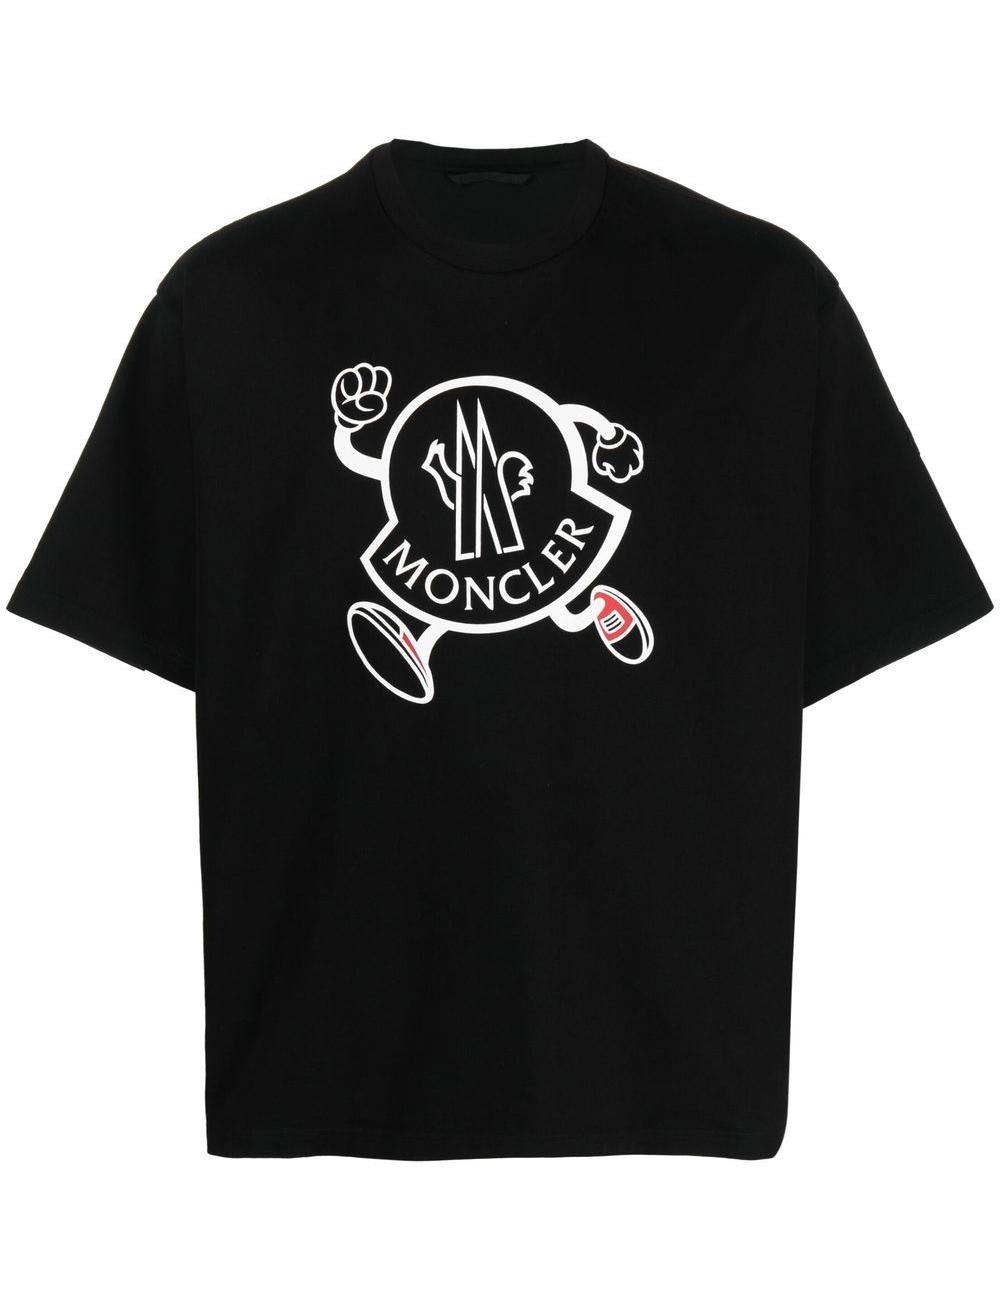 Logo Print Crew Neck T-Shirt From Moncler Featuring Black